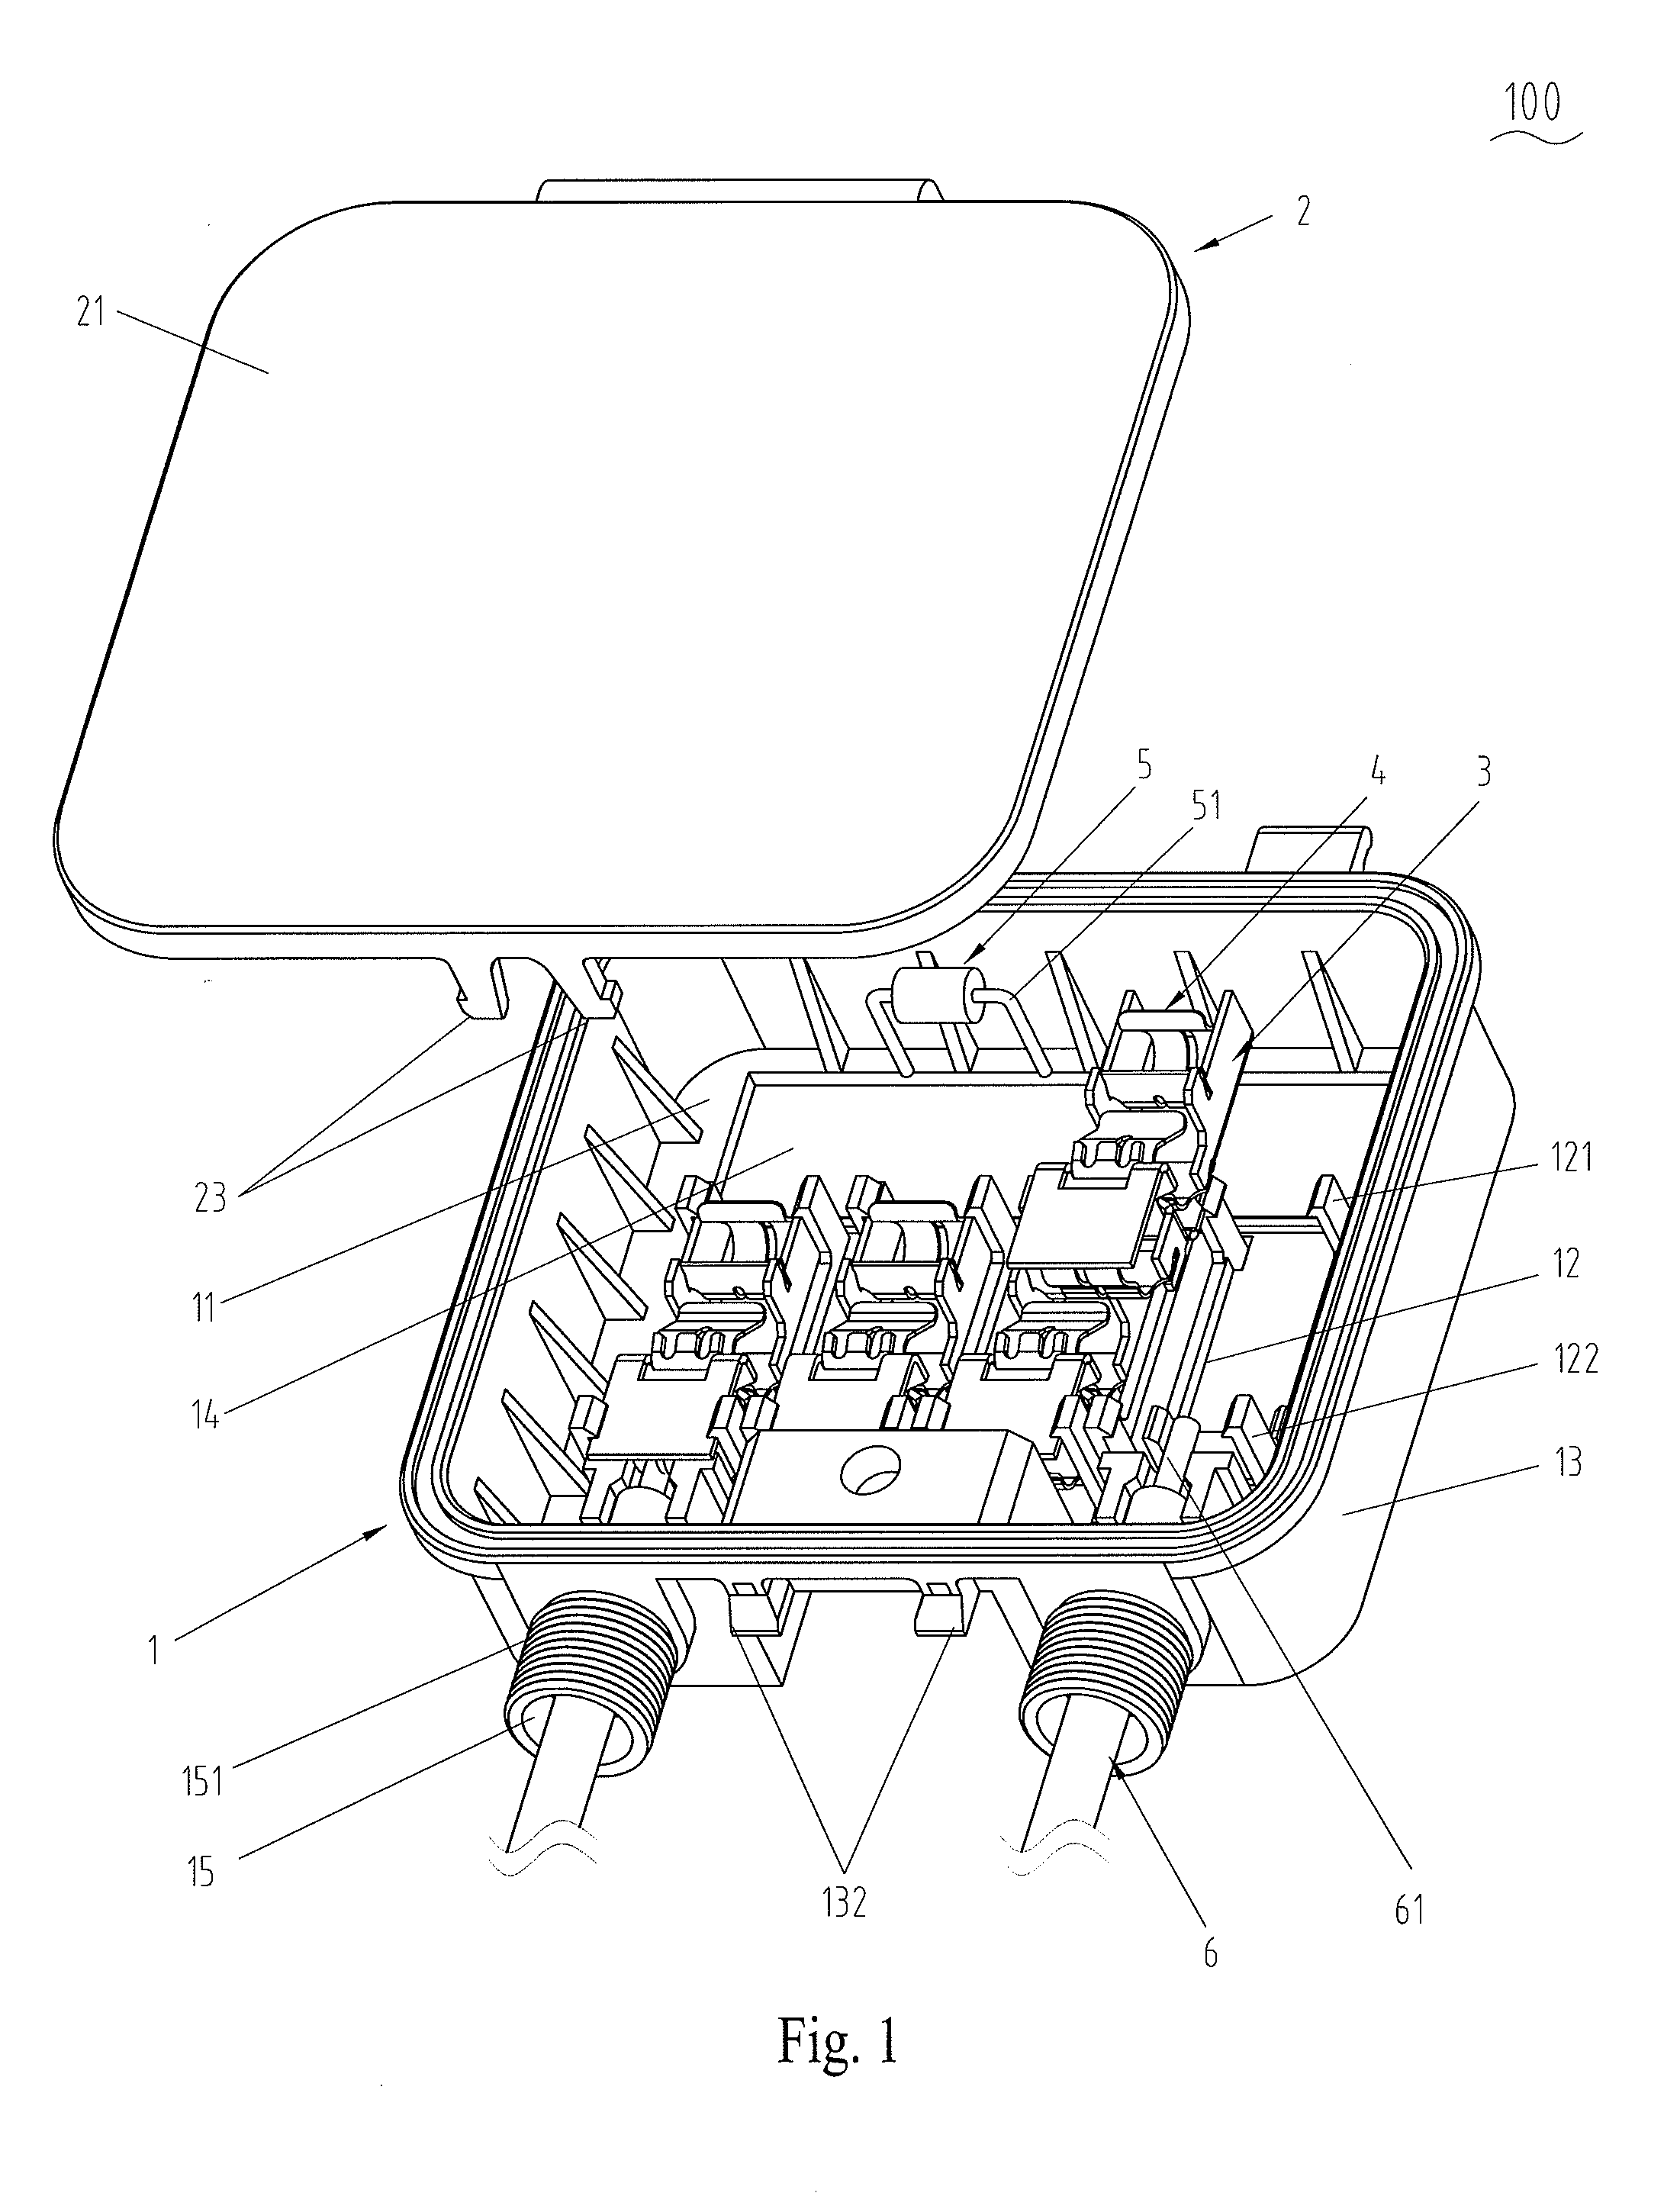 Connecting box for a solar panel